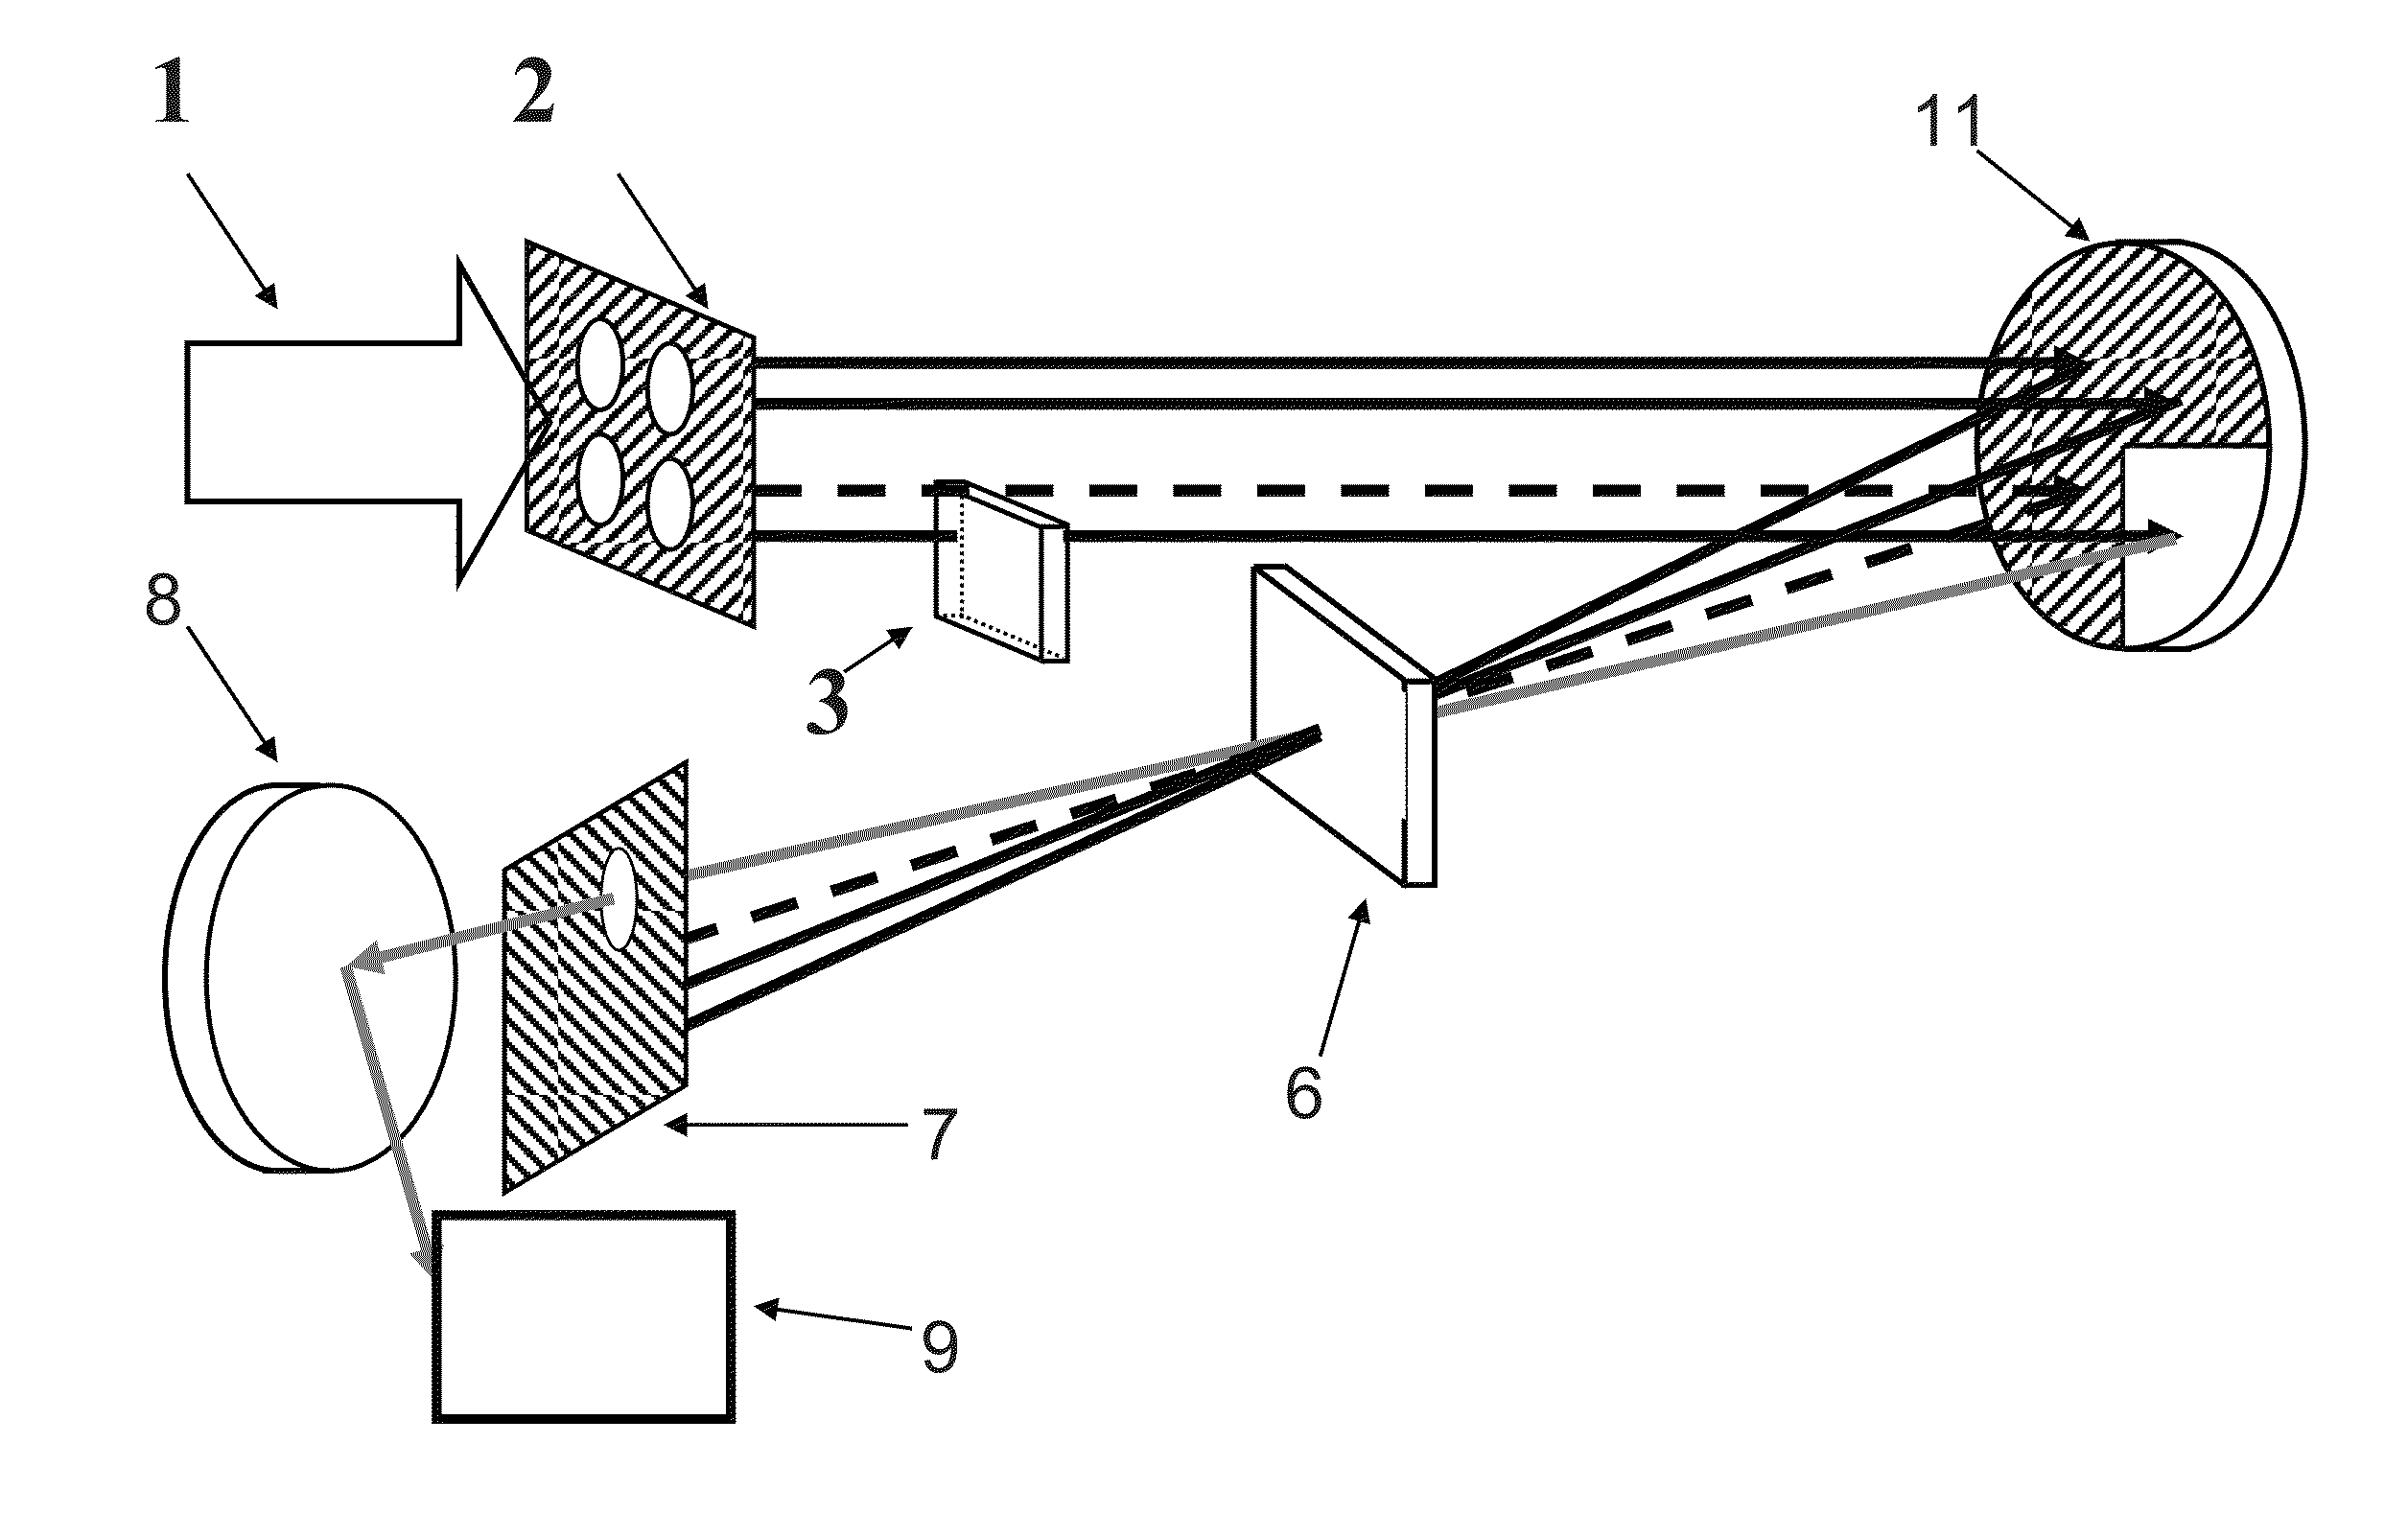 Method and apparatus for femtosecond laser pulse measurement based on transient-grating effect